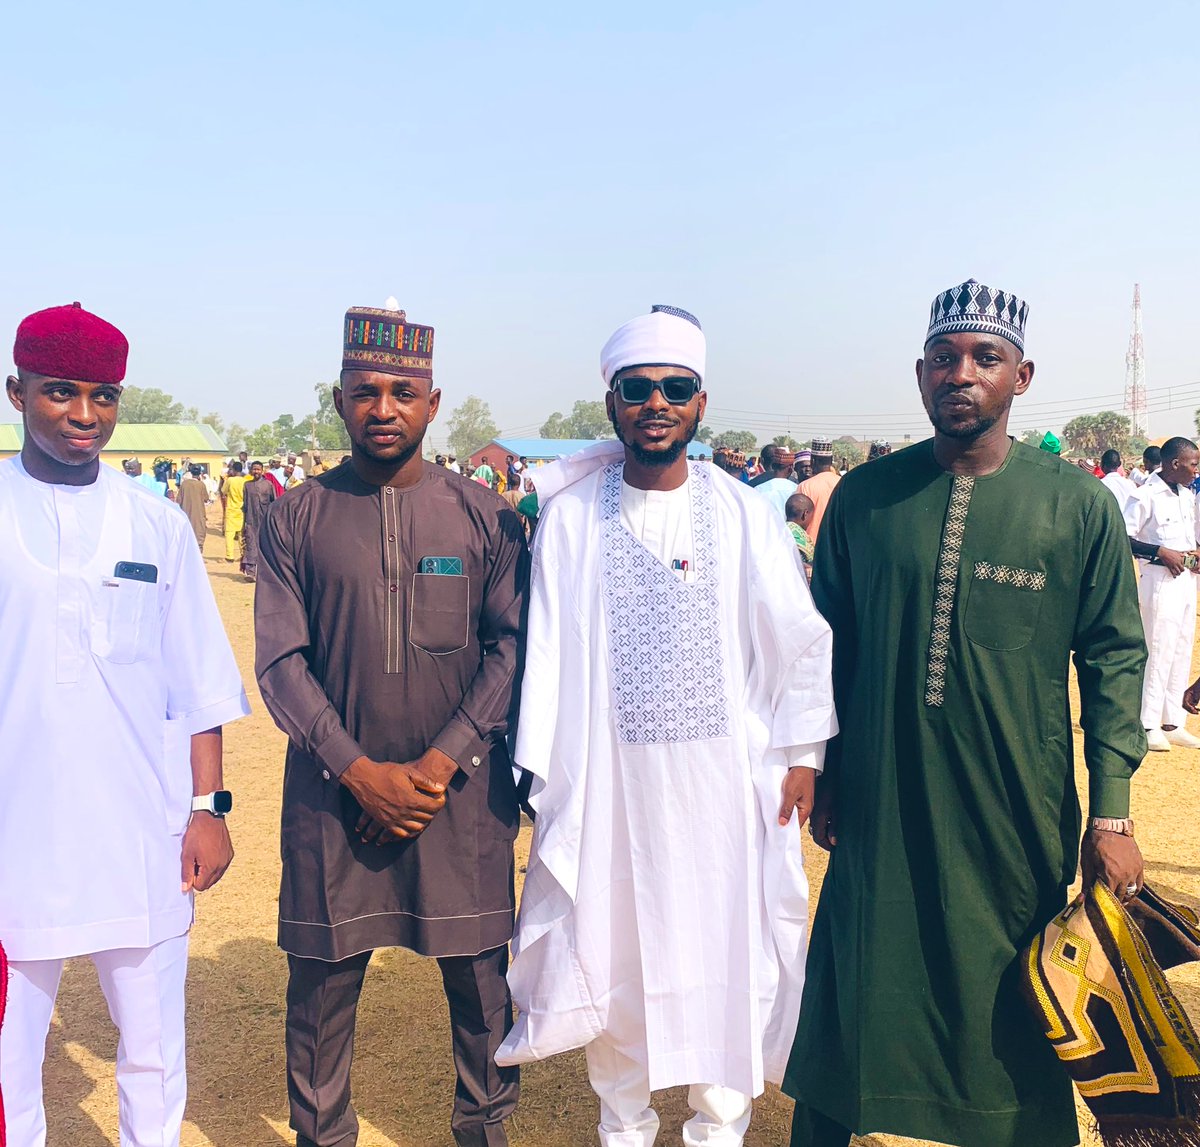 Together with some newly recruited OBI-dients. I’m very sure you’re noticing new accounts from the north on this app, our mission of bringing millions of people is actually yielding a positive result. May Nigeria succeed, Ameen